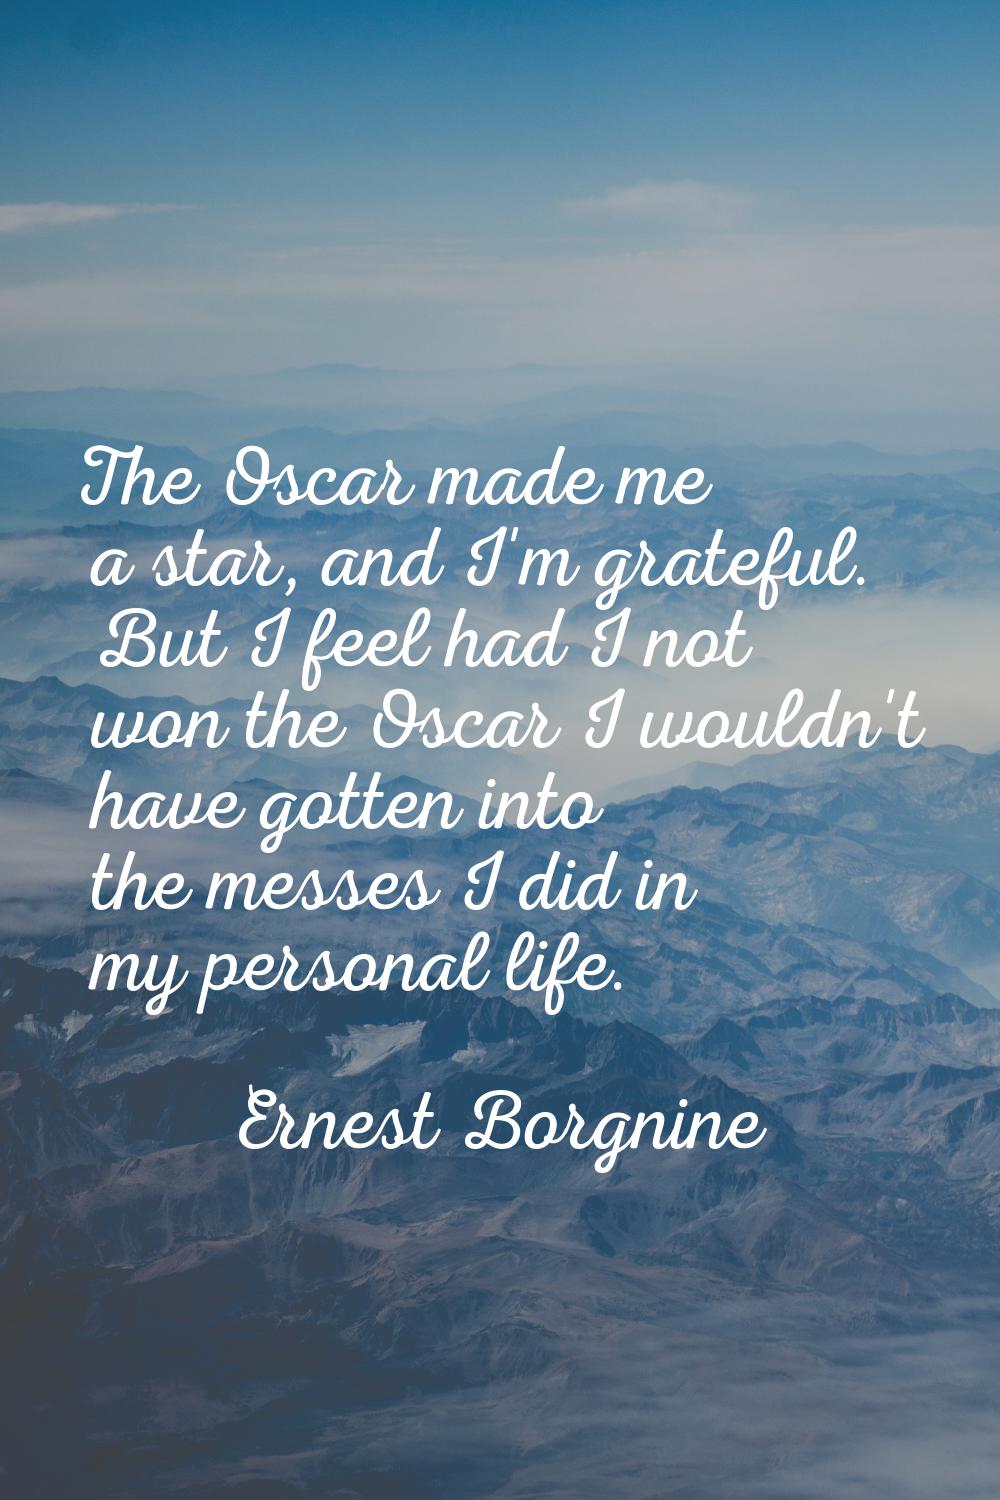 The Oscar made me a star, and I'm grateful. But I feel had I not won the Oscar I wouldn't have gott